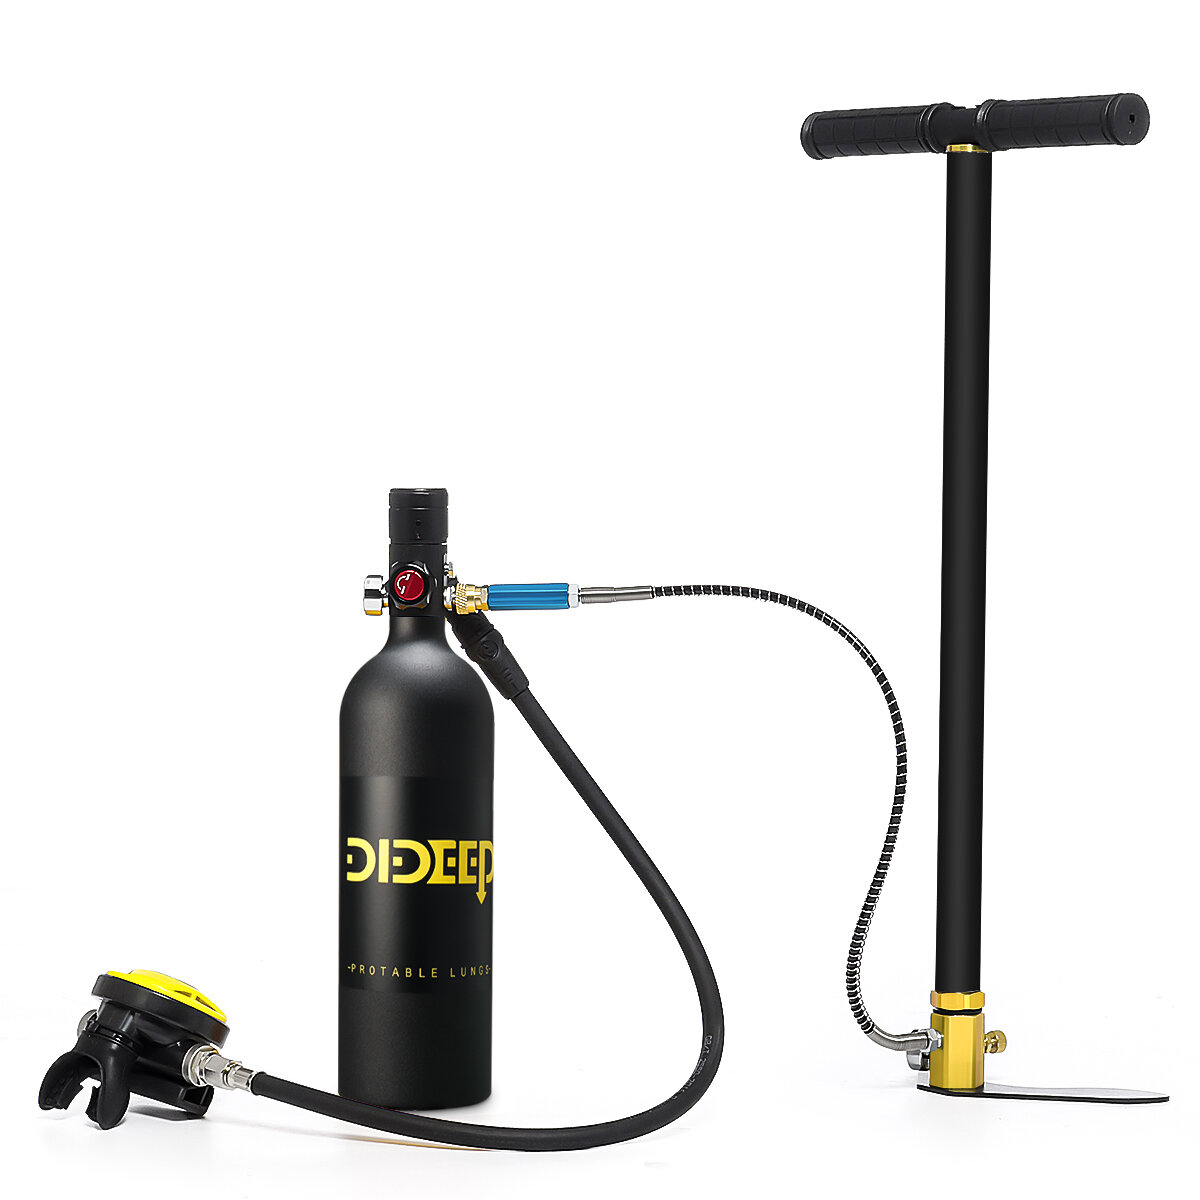 Image of DIDEEP X4000 Pro 1L Scuba Diving Tank Oxygen Diving Cylinder Equipment Underwater Diving Set